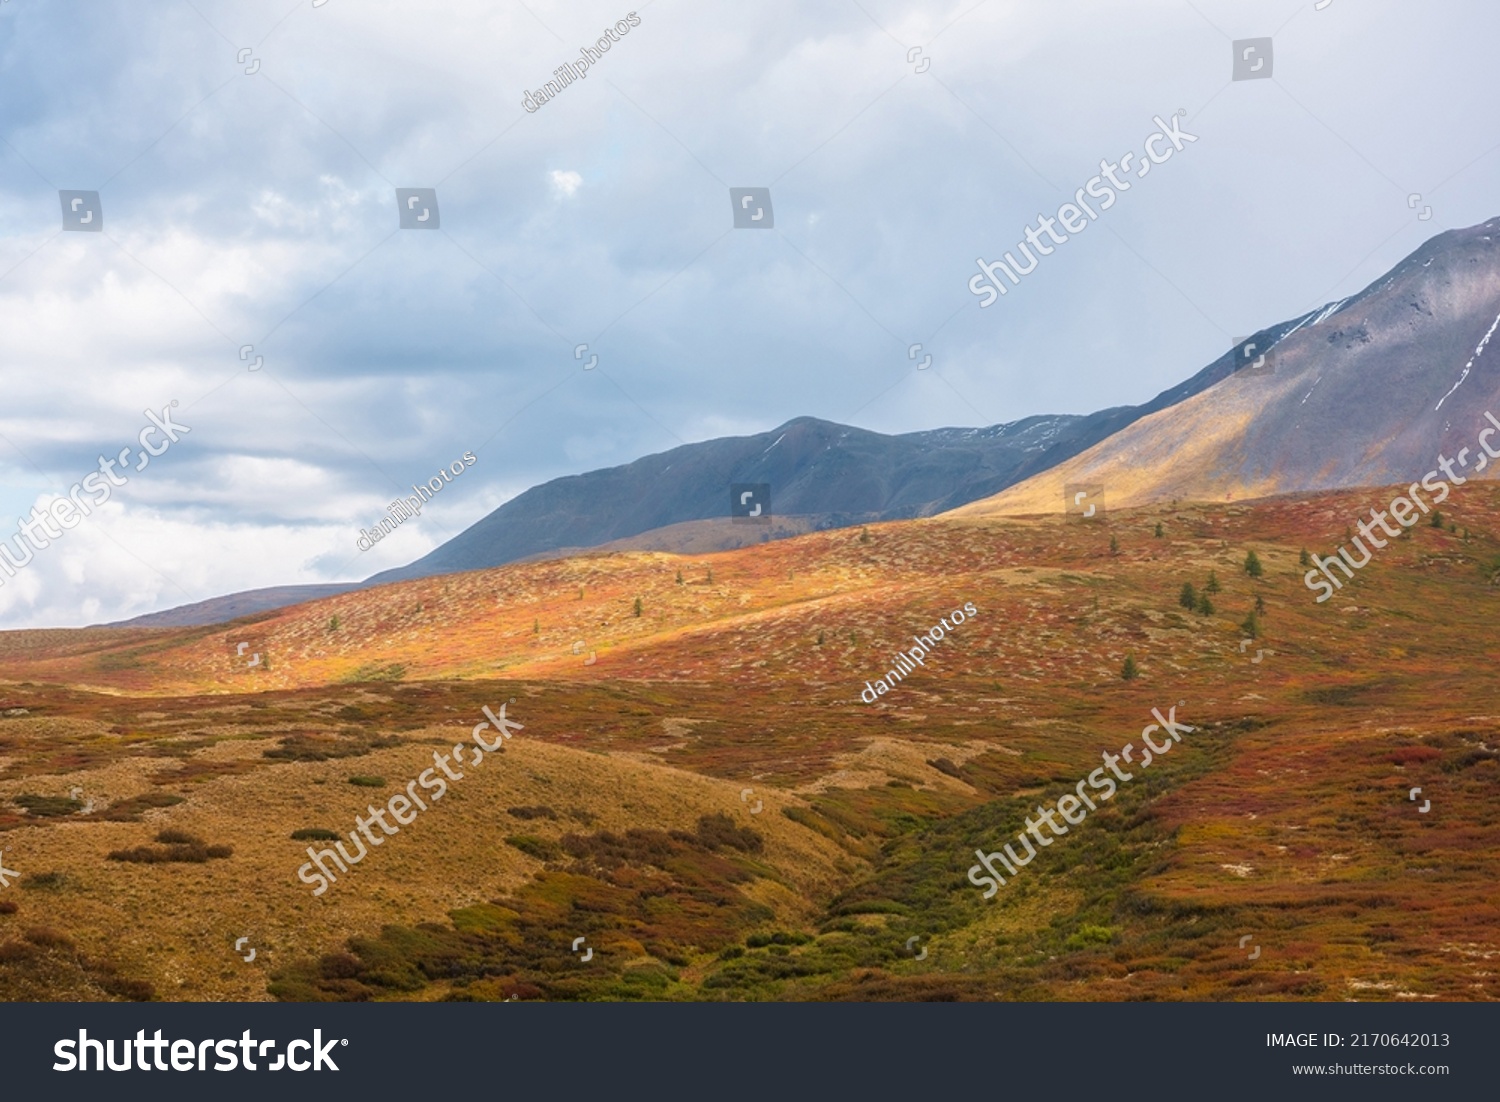 Motley autumn landscape with sunlit hills and mountain range silhouette under dramatic cloudy sky. Vivid autumn colors in mountains. Sunlight on multicolor hills and rainy clouds in changeable weather #2170642013